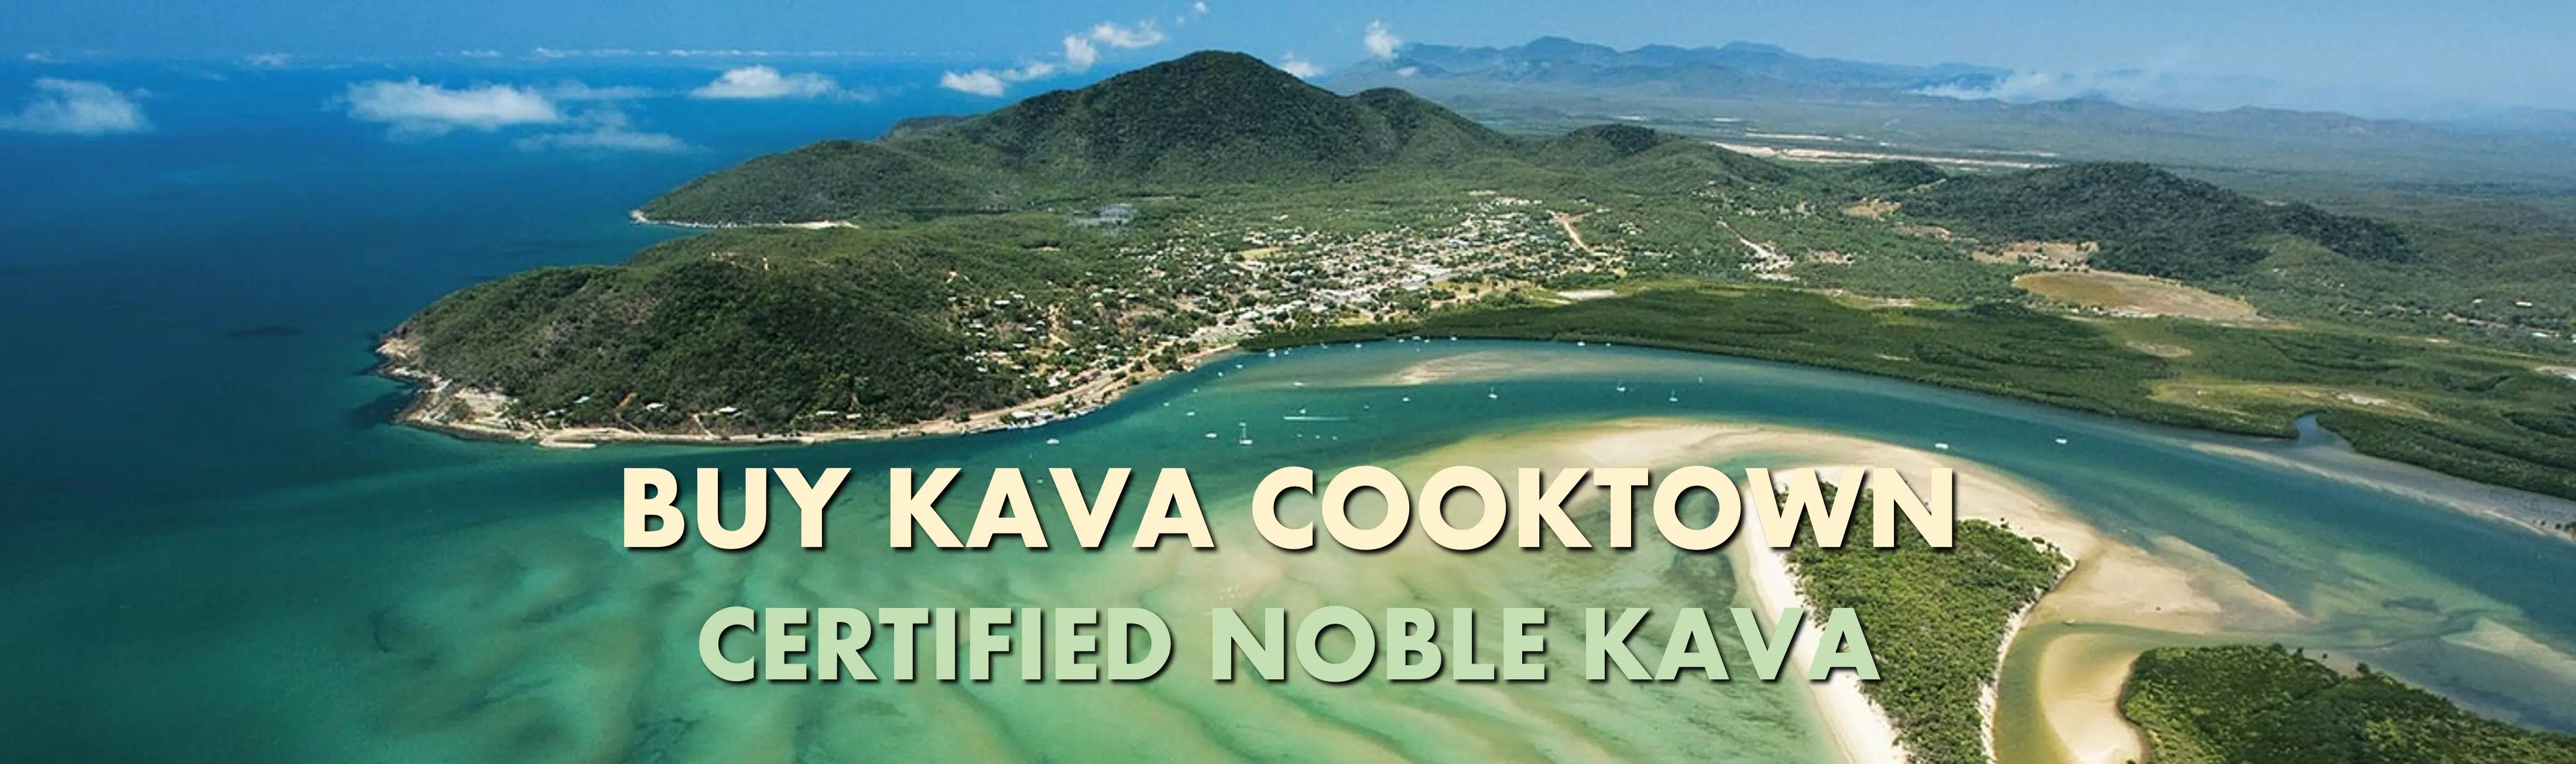 Aerial view of Cooktown with caption Buy Kava Cooktown Certified Noble Kava